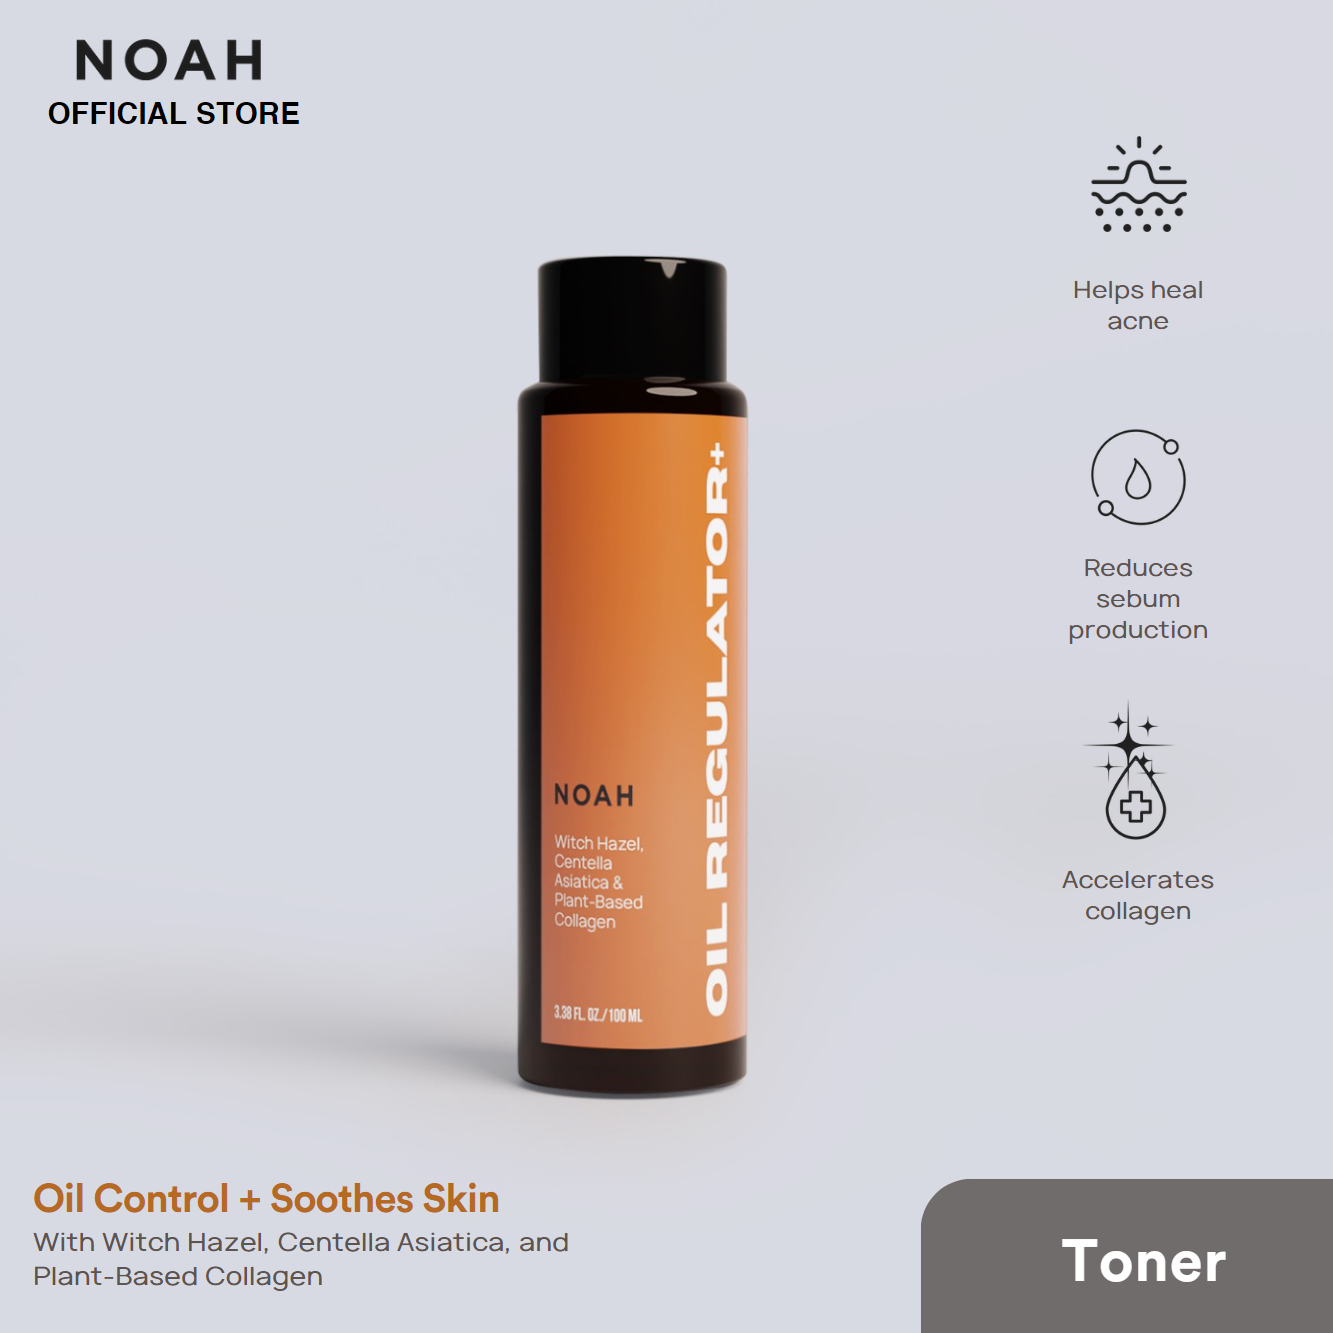 Noah Freshman Set (For Less Oily Skin and Acne, Budget-Friendly)